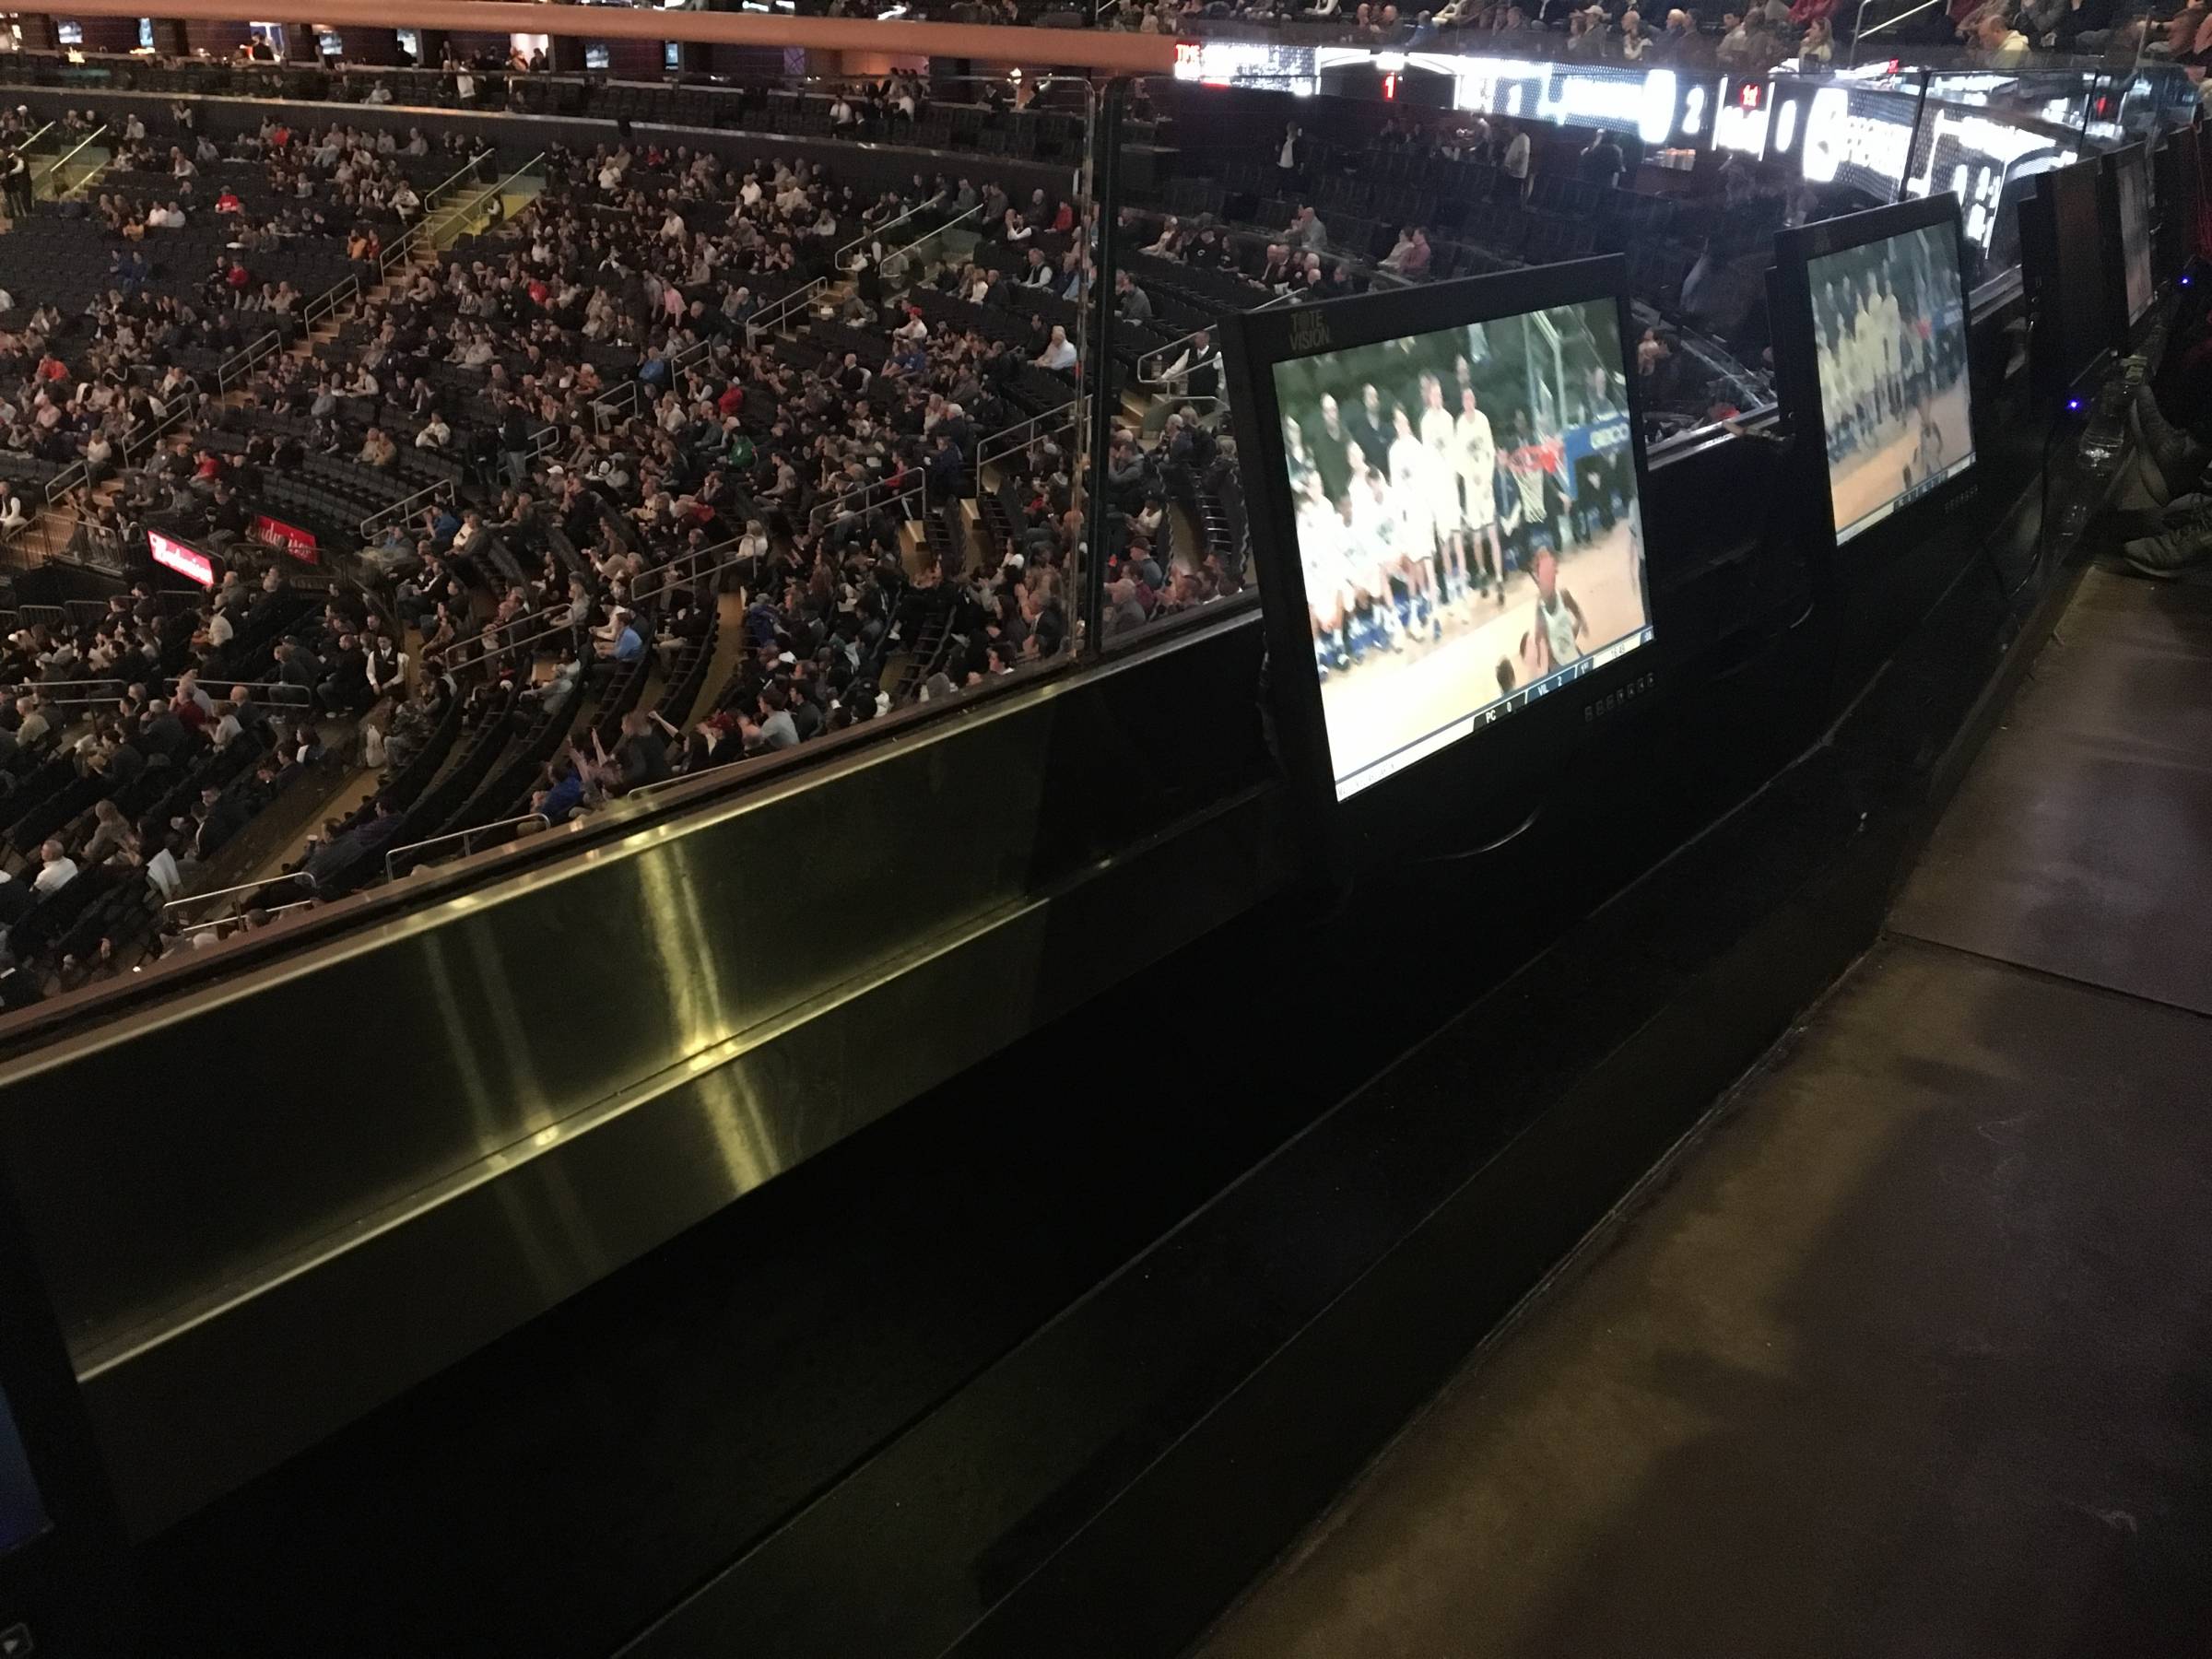 View of TV's in front of 200 level sections at Madison Square Garden